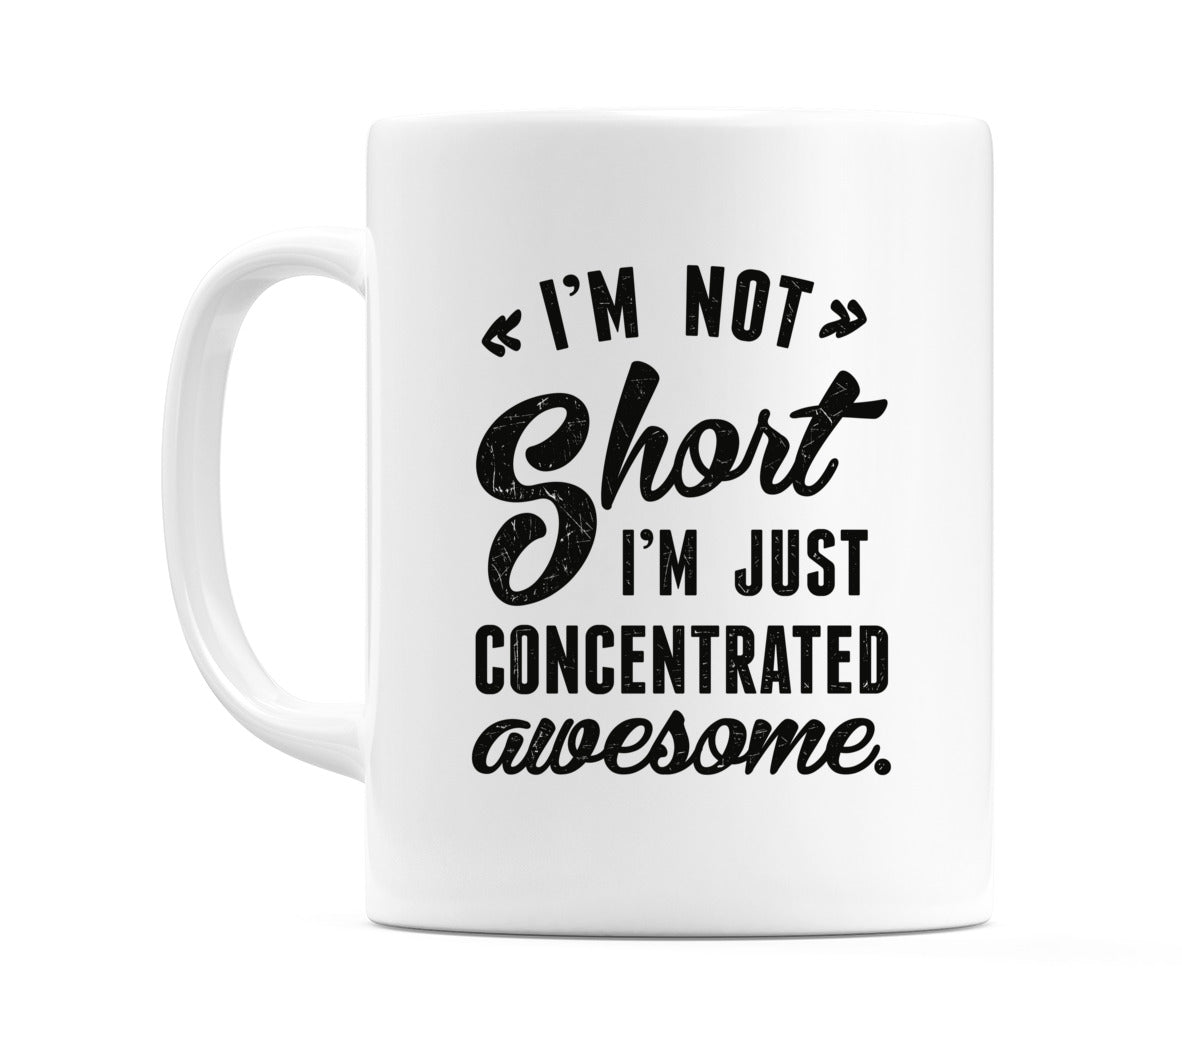 I'M NOT Short I'm JUST CONCENTRATED awesome. Mug